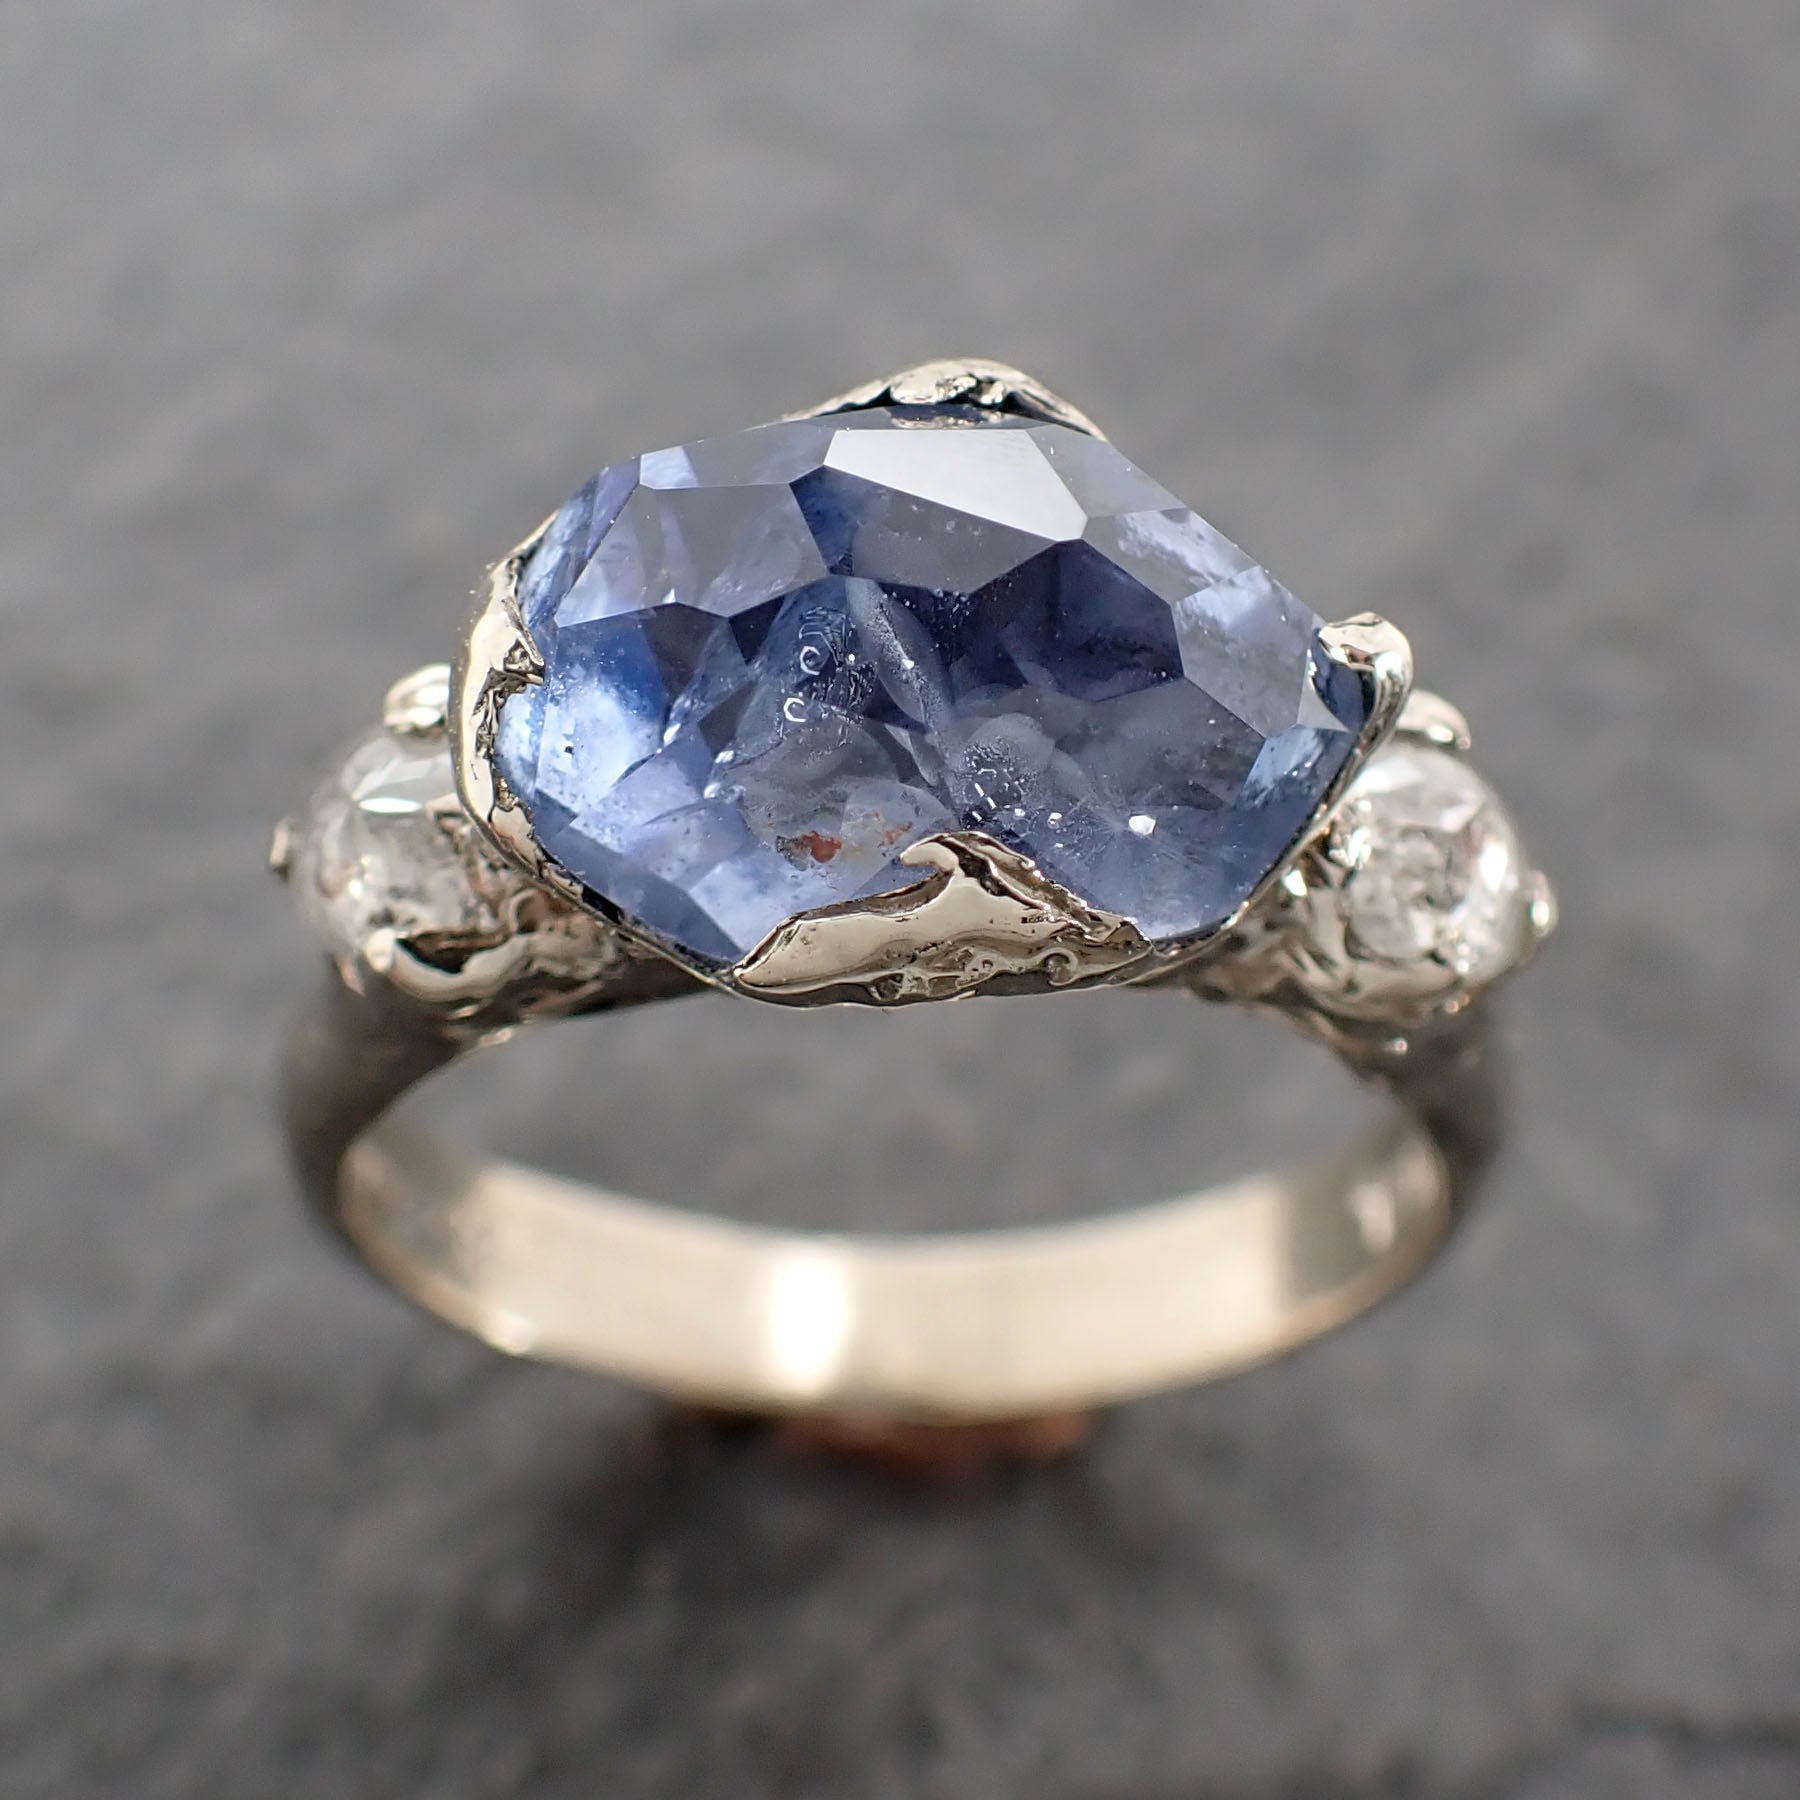 partially faceted blue montana sapphire and fancy diamonds 18k white gold engagement wedding ring custom gemstone ring multi stone ring 2504 Alternative Engagement